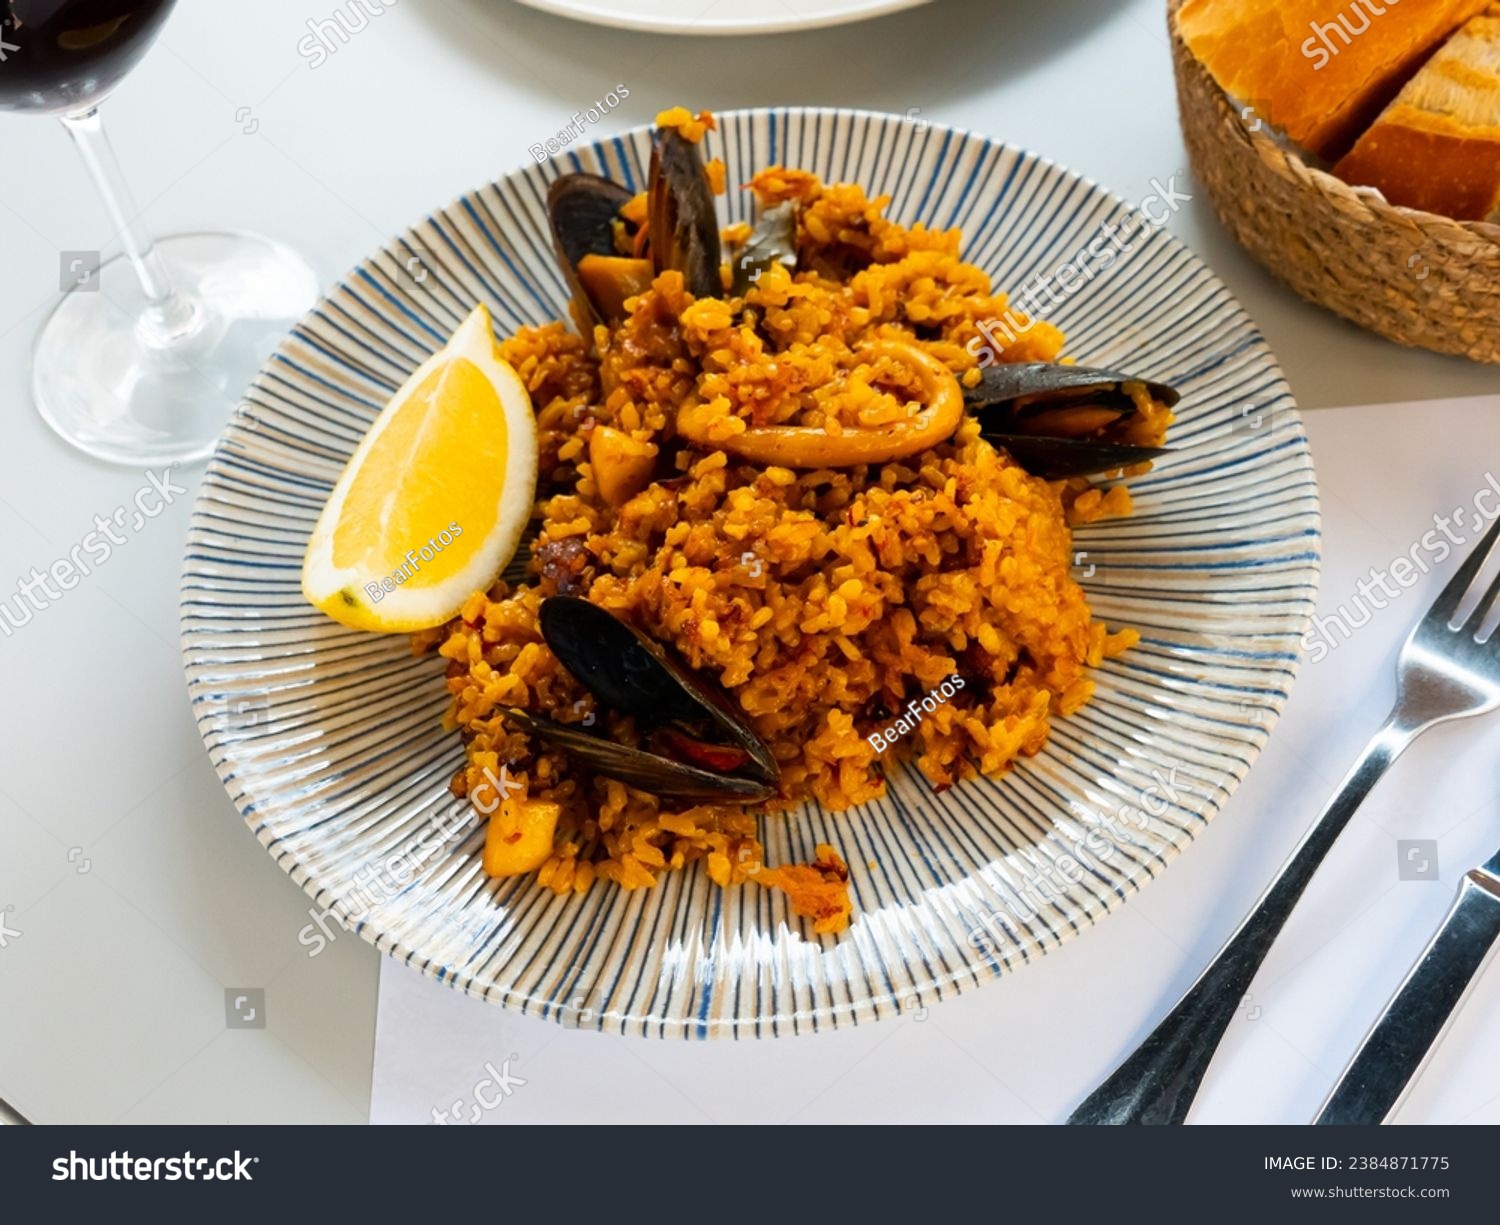 Appetizing racy seafood paella with mussels and squid rings served with lemon slice and glass of red wine. Traditional Spanish cuisine. #2384871775